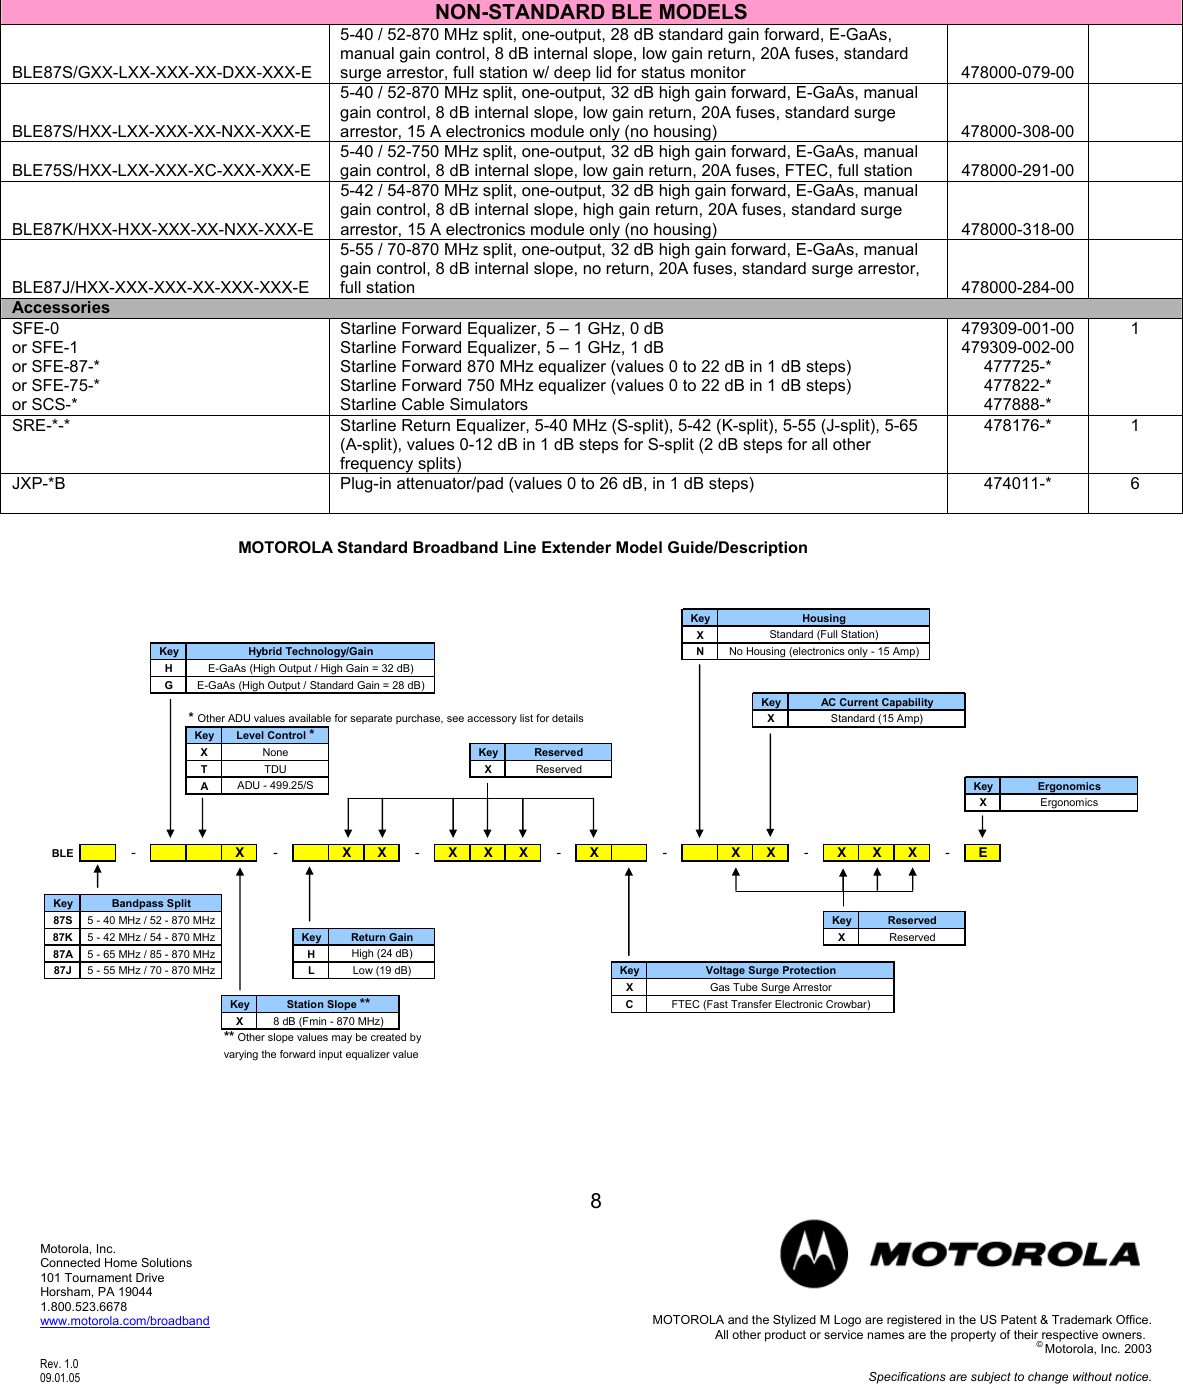 Page 8 of 9 - Motorola Motorola-Ble87-Users-Manual BLE_Catalog_Specifications_9-1-05